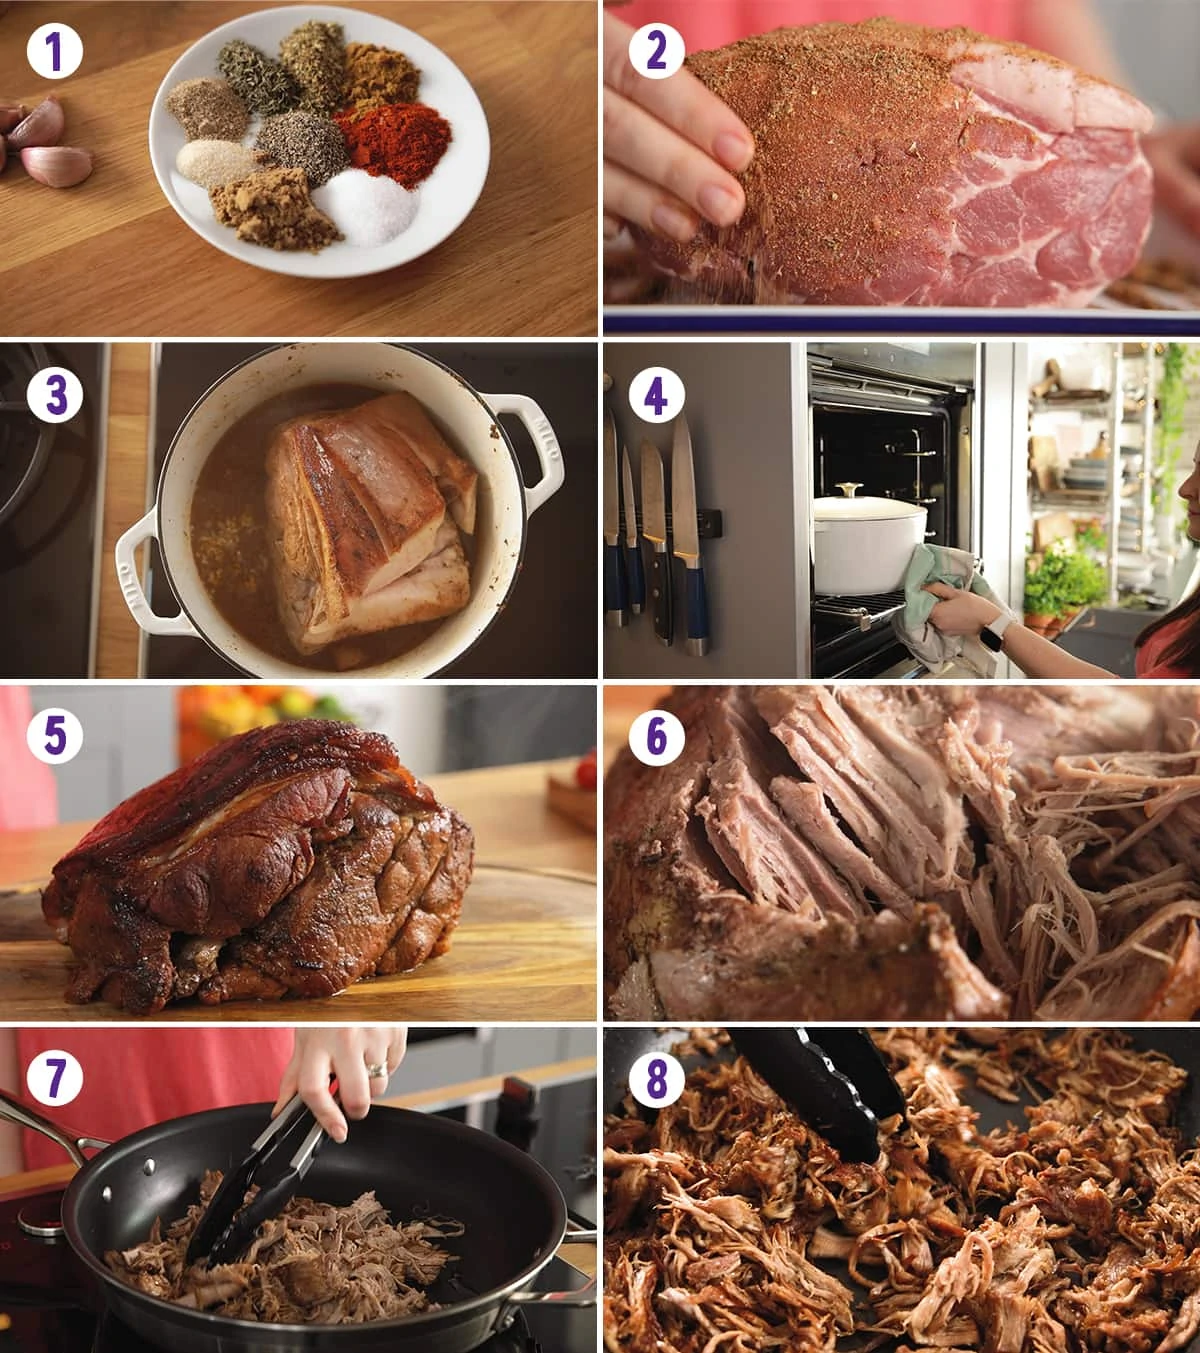 8 image collage showing how to make Pork Gyros